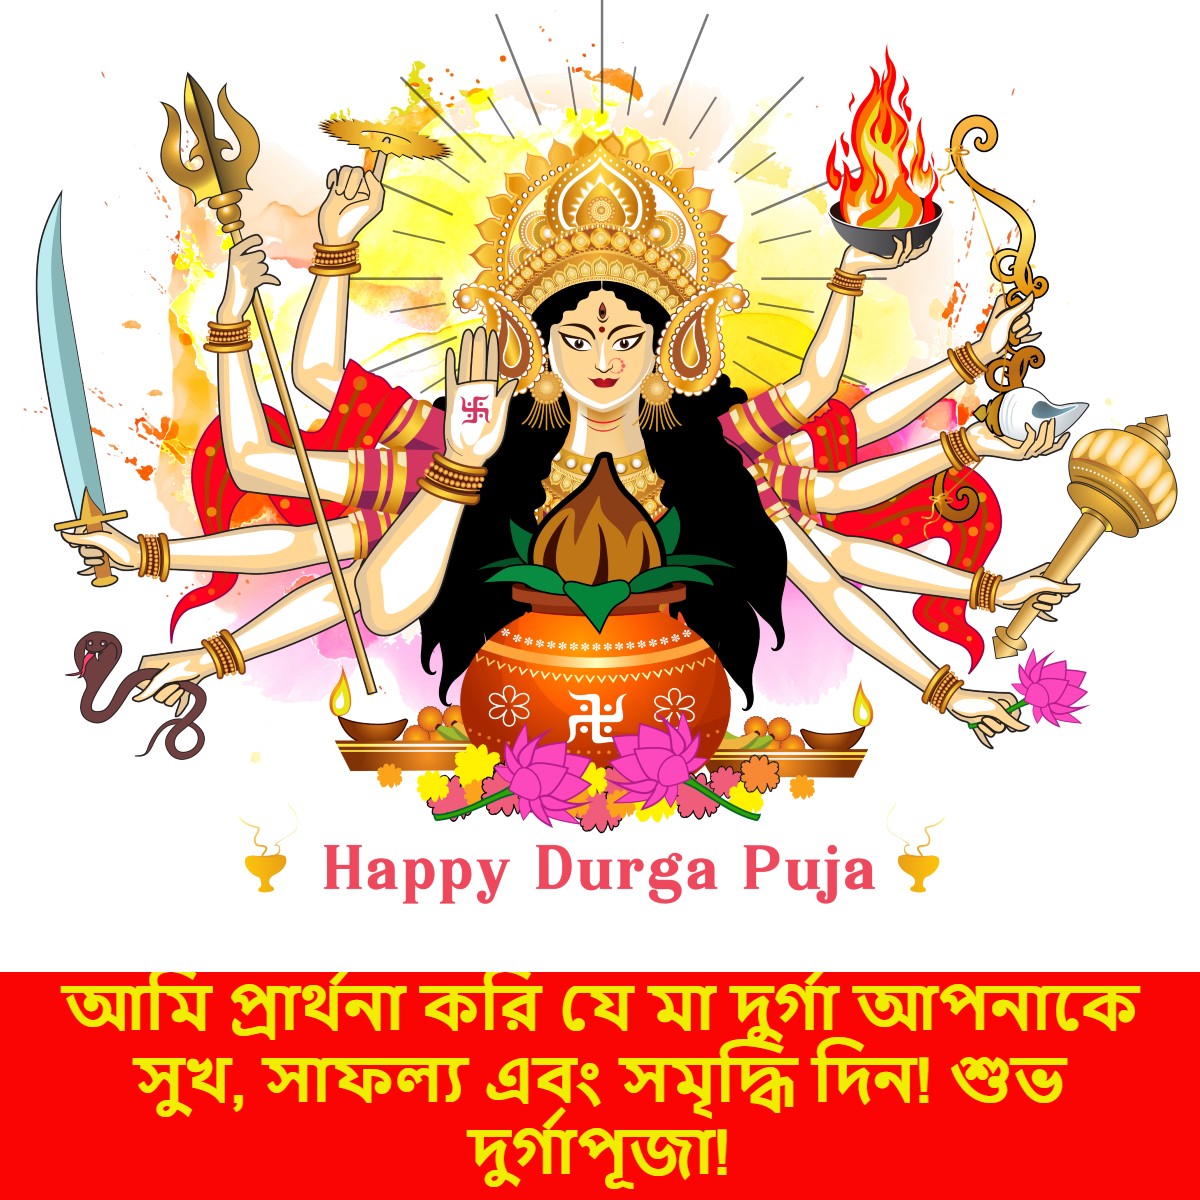 Happy Durga Puja 2022 Wishes, Greetings, Whatsapp Status, Images And Quotes You Can Share With Your Dear Ones. (Image: Shutterstock)